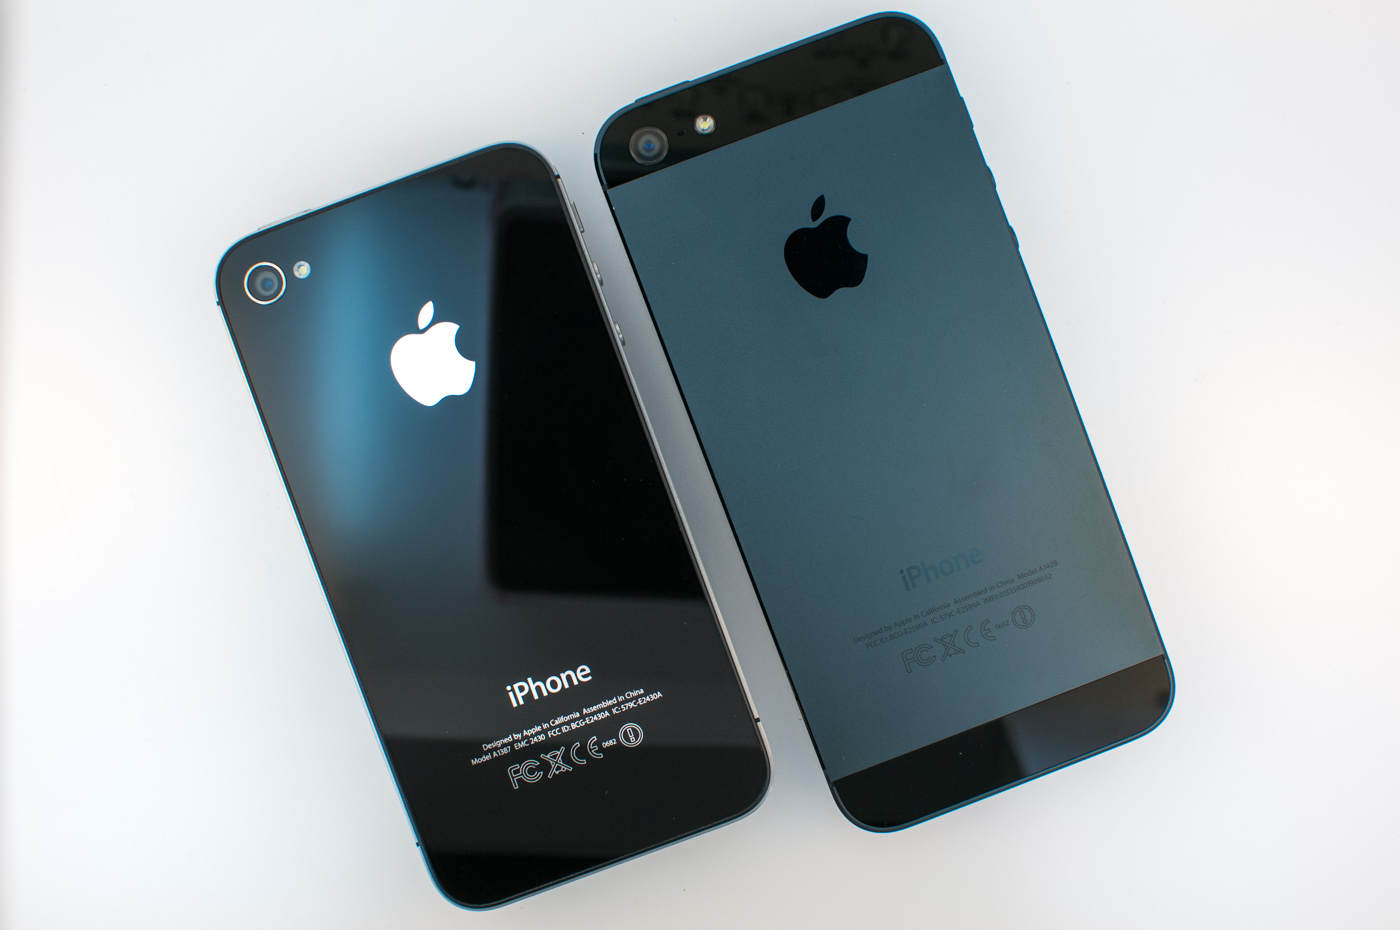 iphone-5-vs-iphone-4s-our-in-depth-comparison